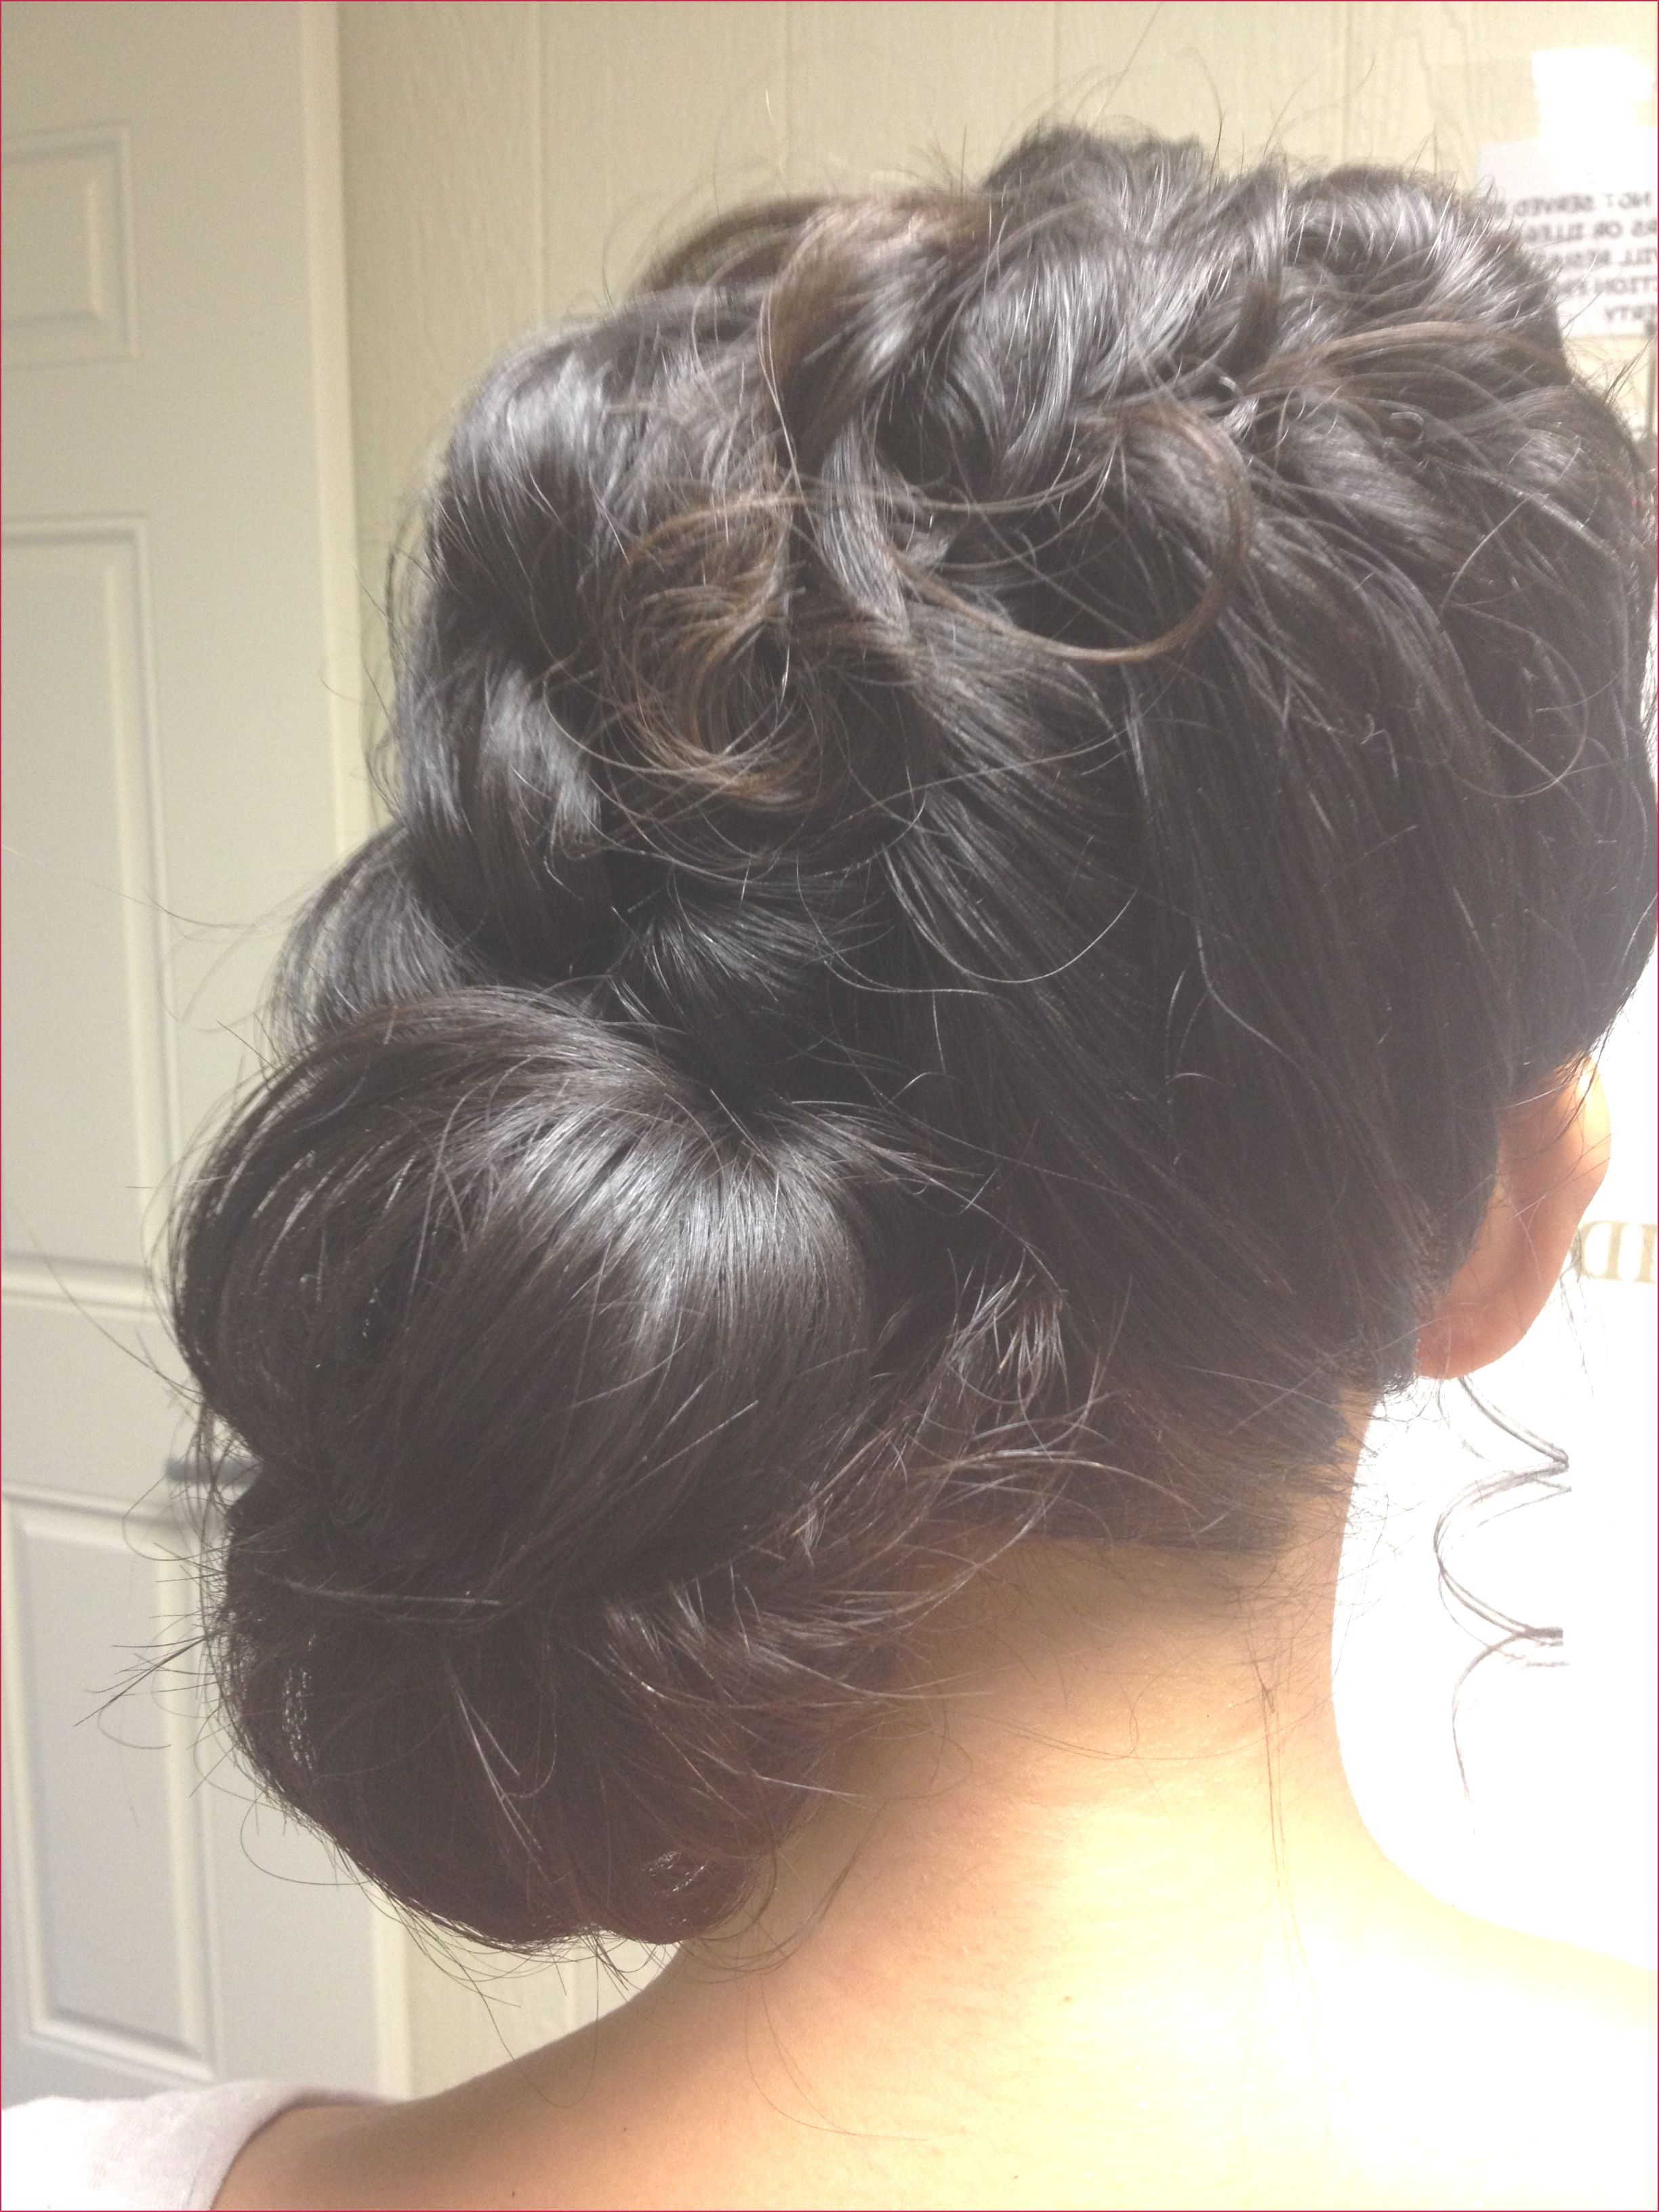 Hairstyles : Curly Side Bun Wedding Hairstyles Cool 20 Soft And Pertaining To Well Known Side Bun Prom Hairstyles With Soft Curls (View 12 of 20)